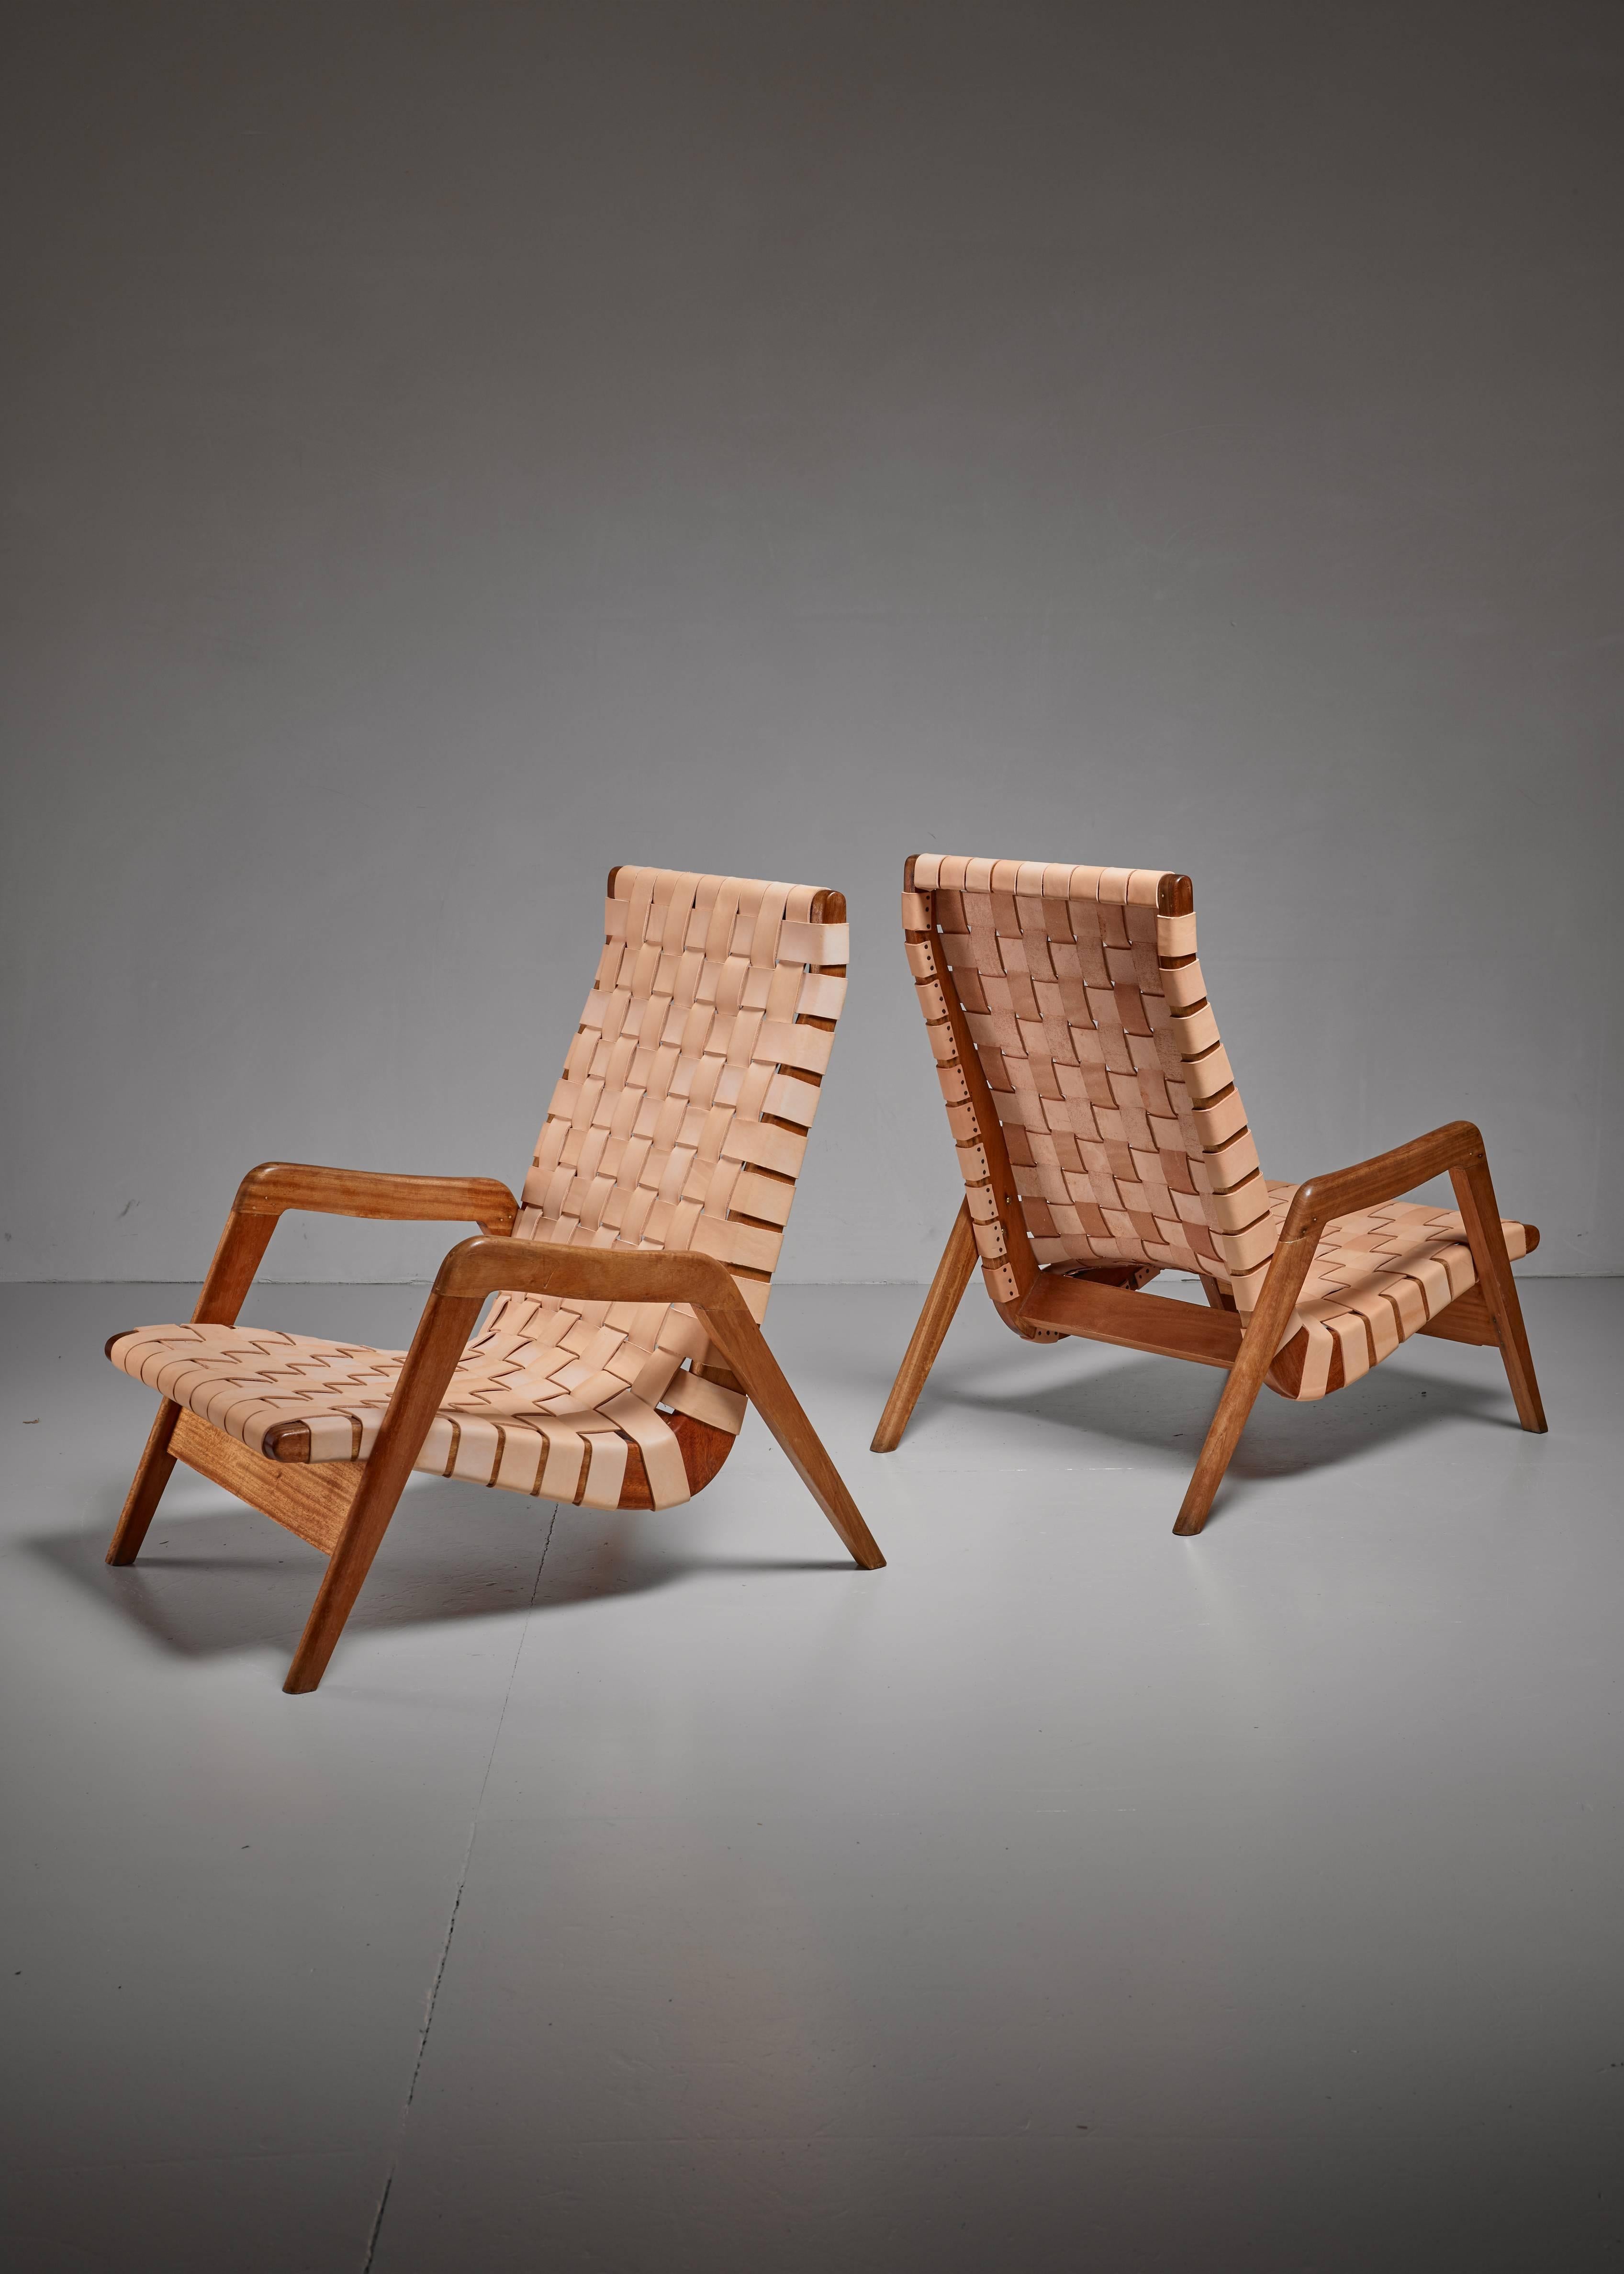 A pair of Mexican iroko lounge chairs, in the manner of Michael van Beuren, with a natural leather webbing. This natural leather will gain a beautiful patina over time.
The chairs have been professionally reupholstered in our in-house atelier.